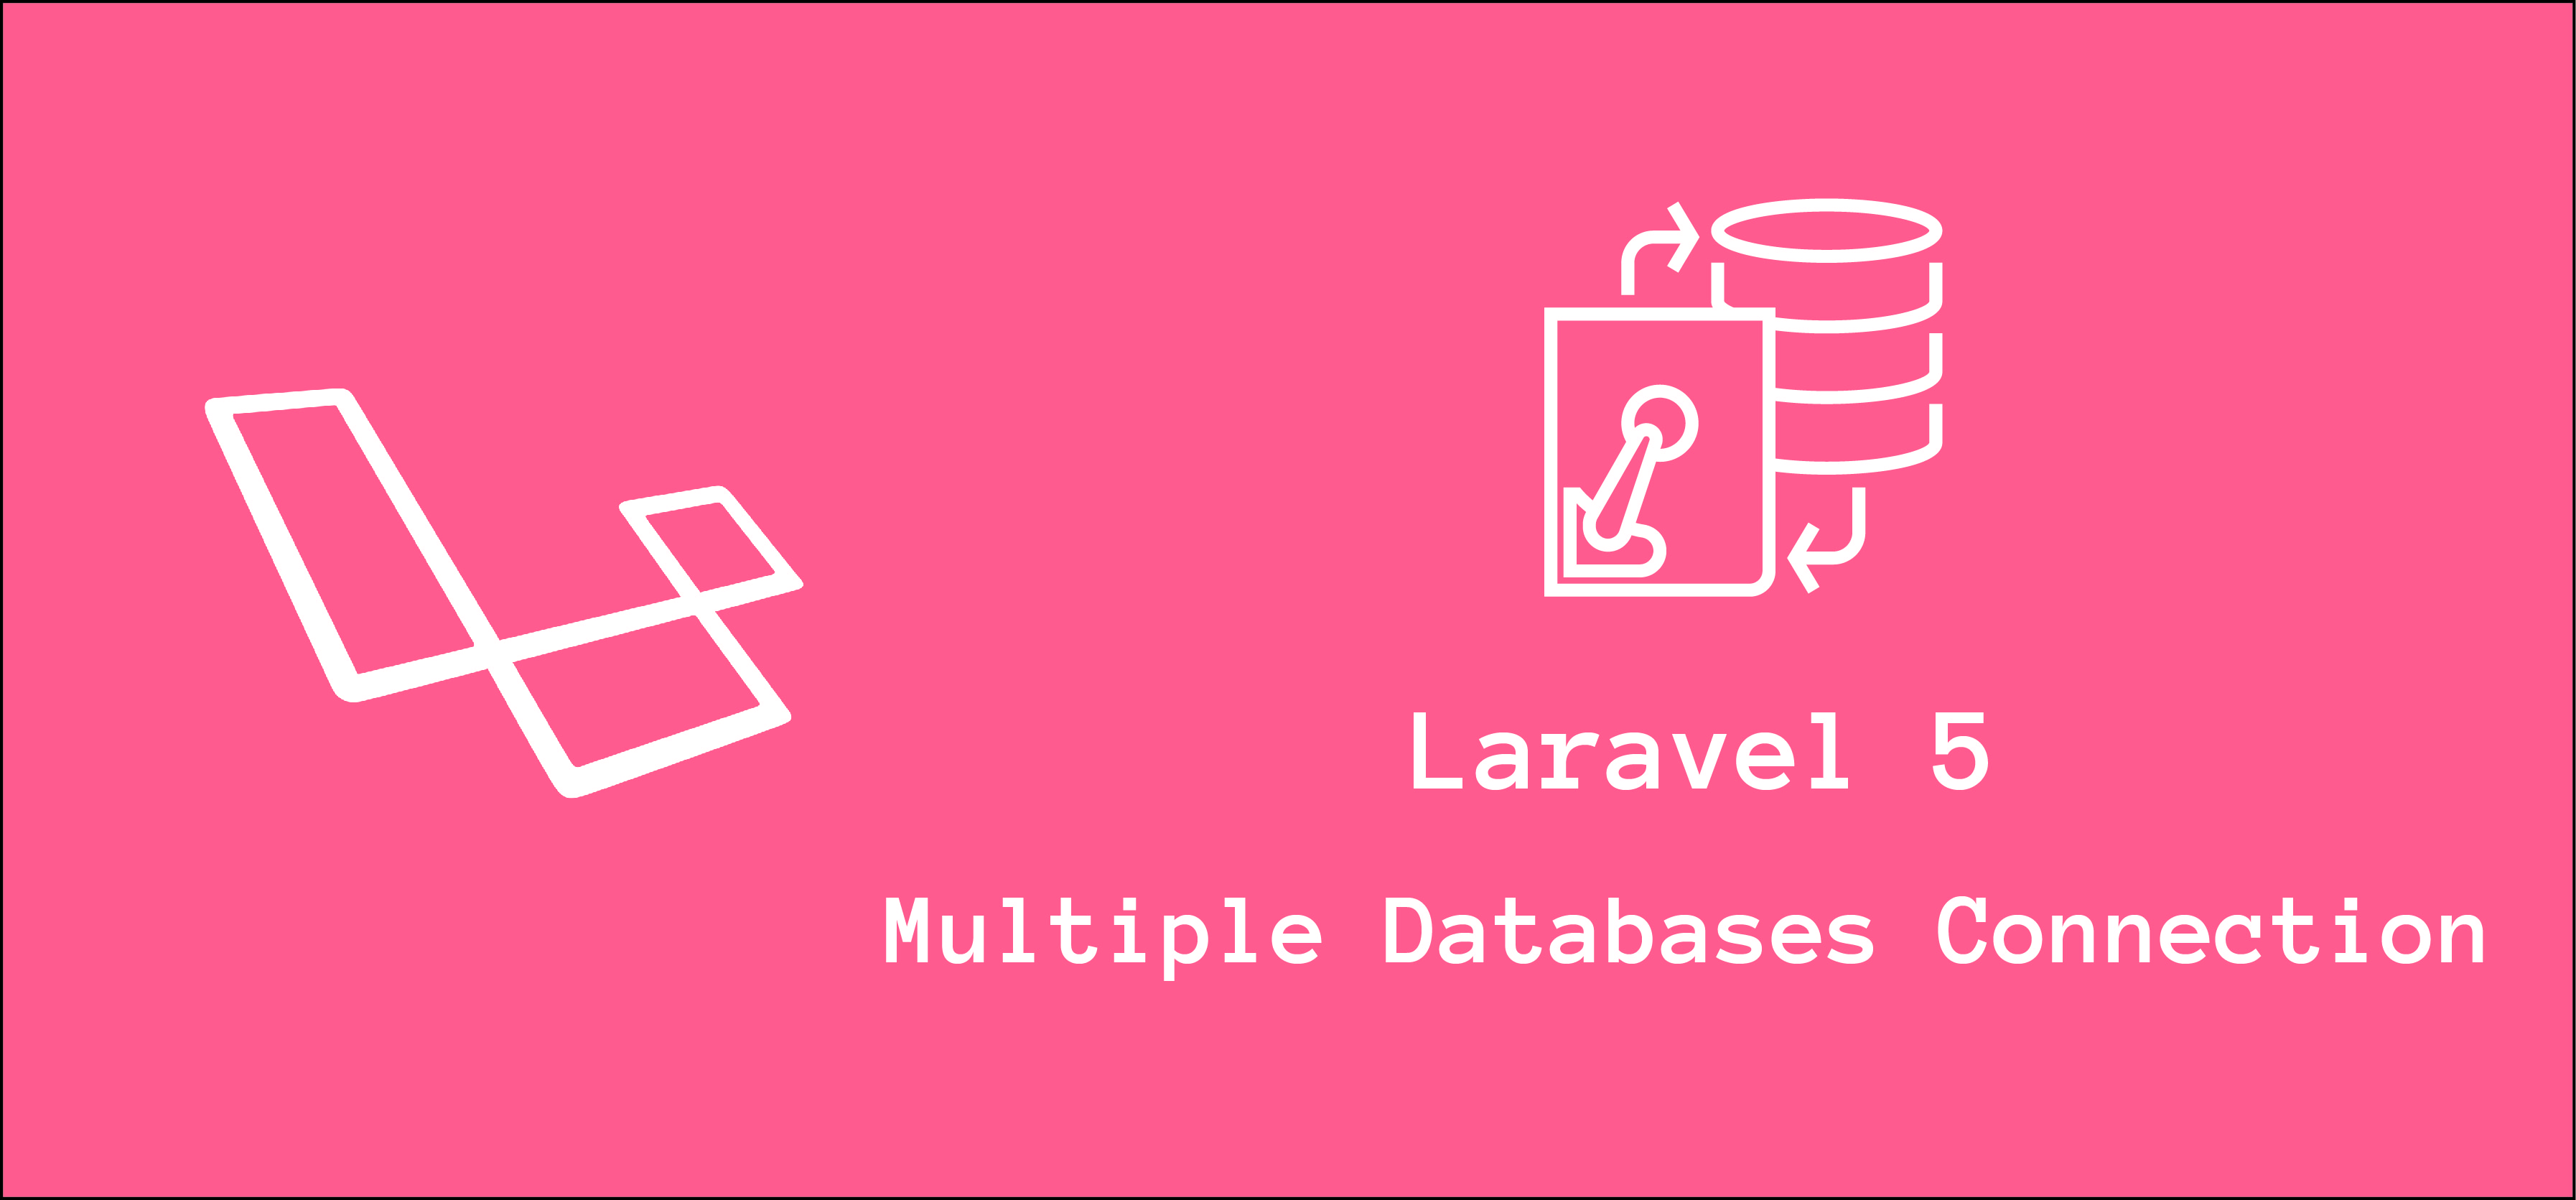 Let's see how to connect Laravel with SQLite database